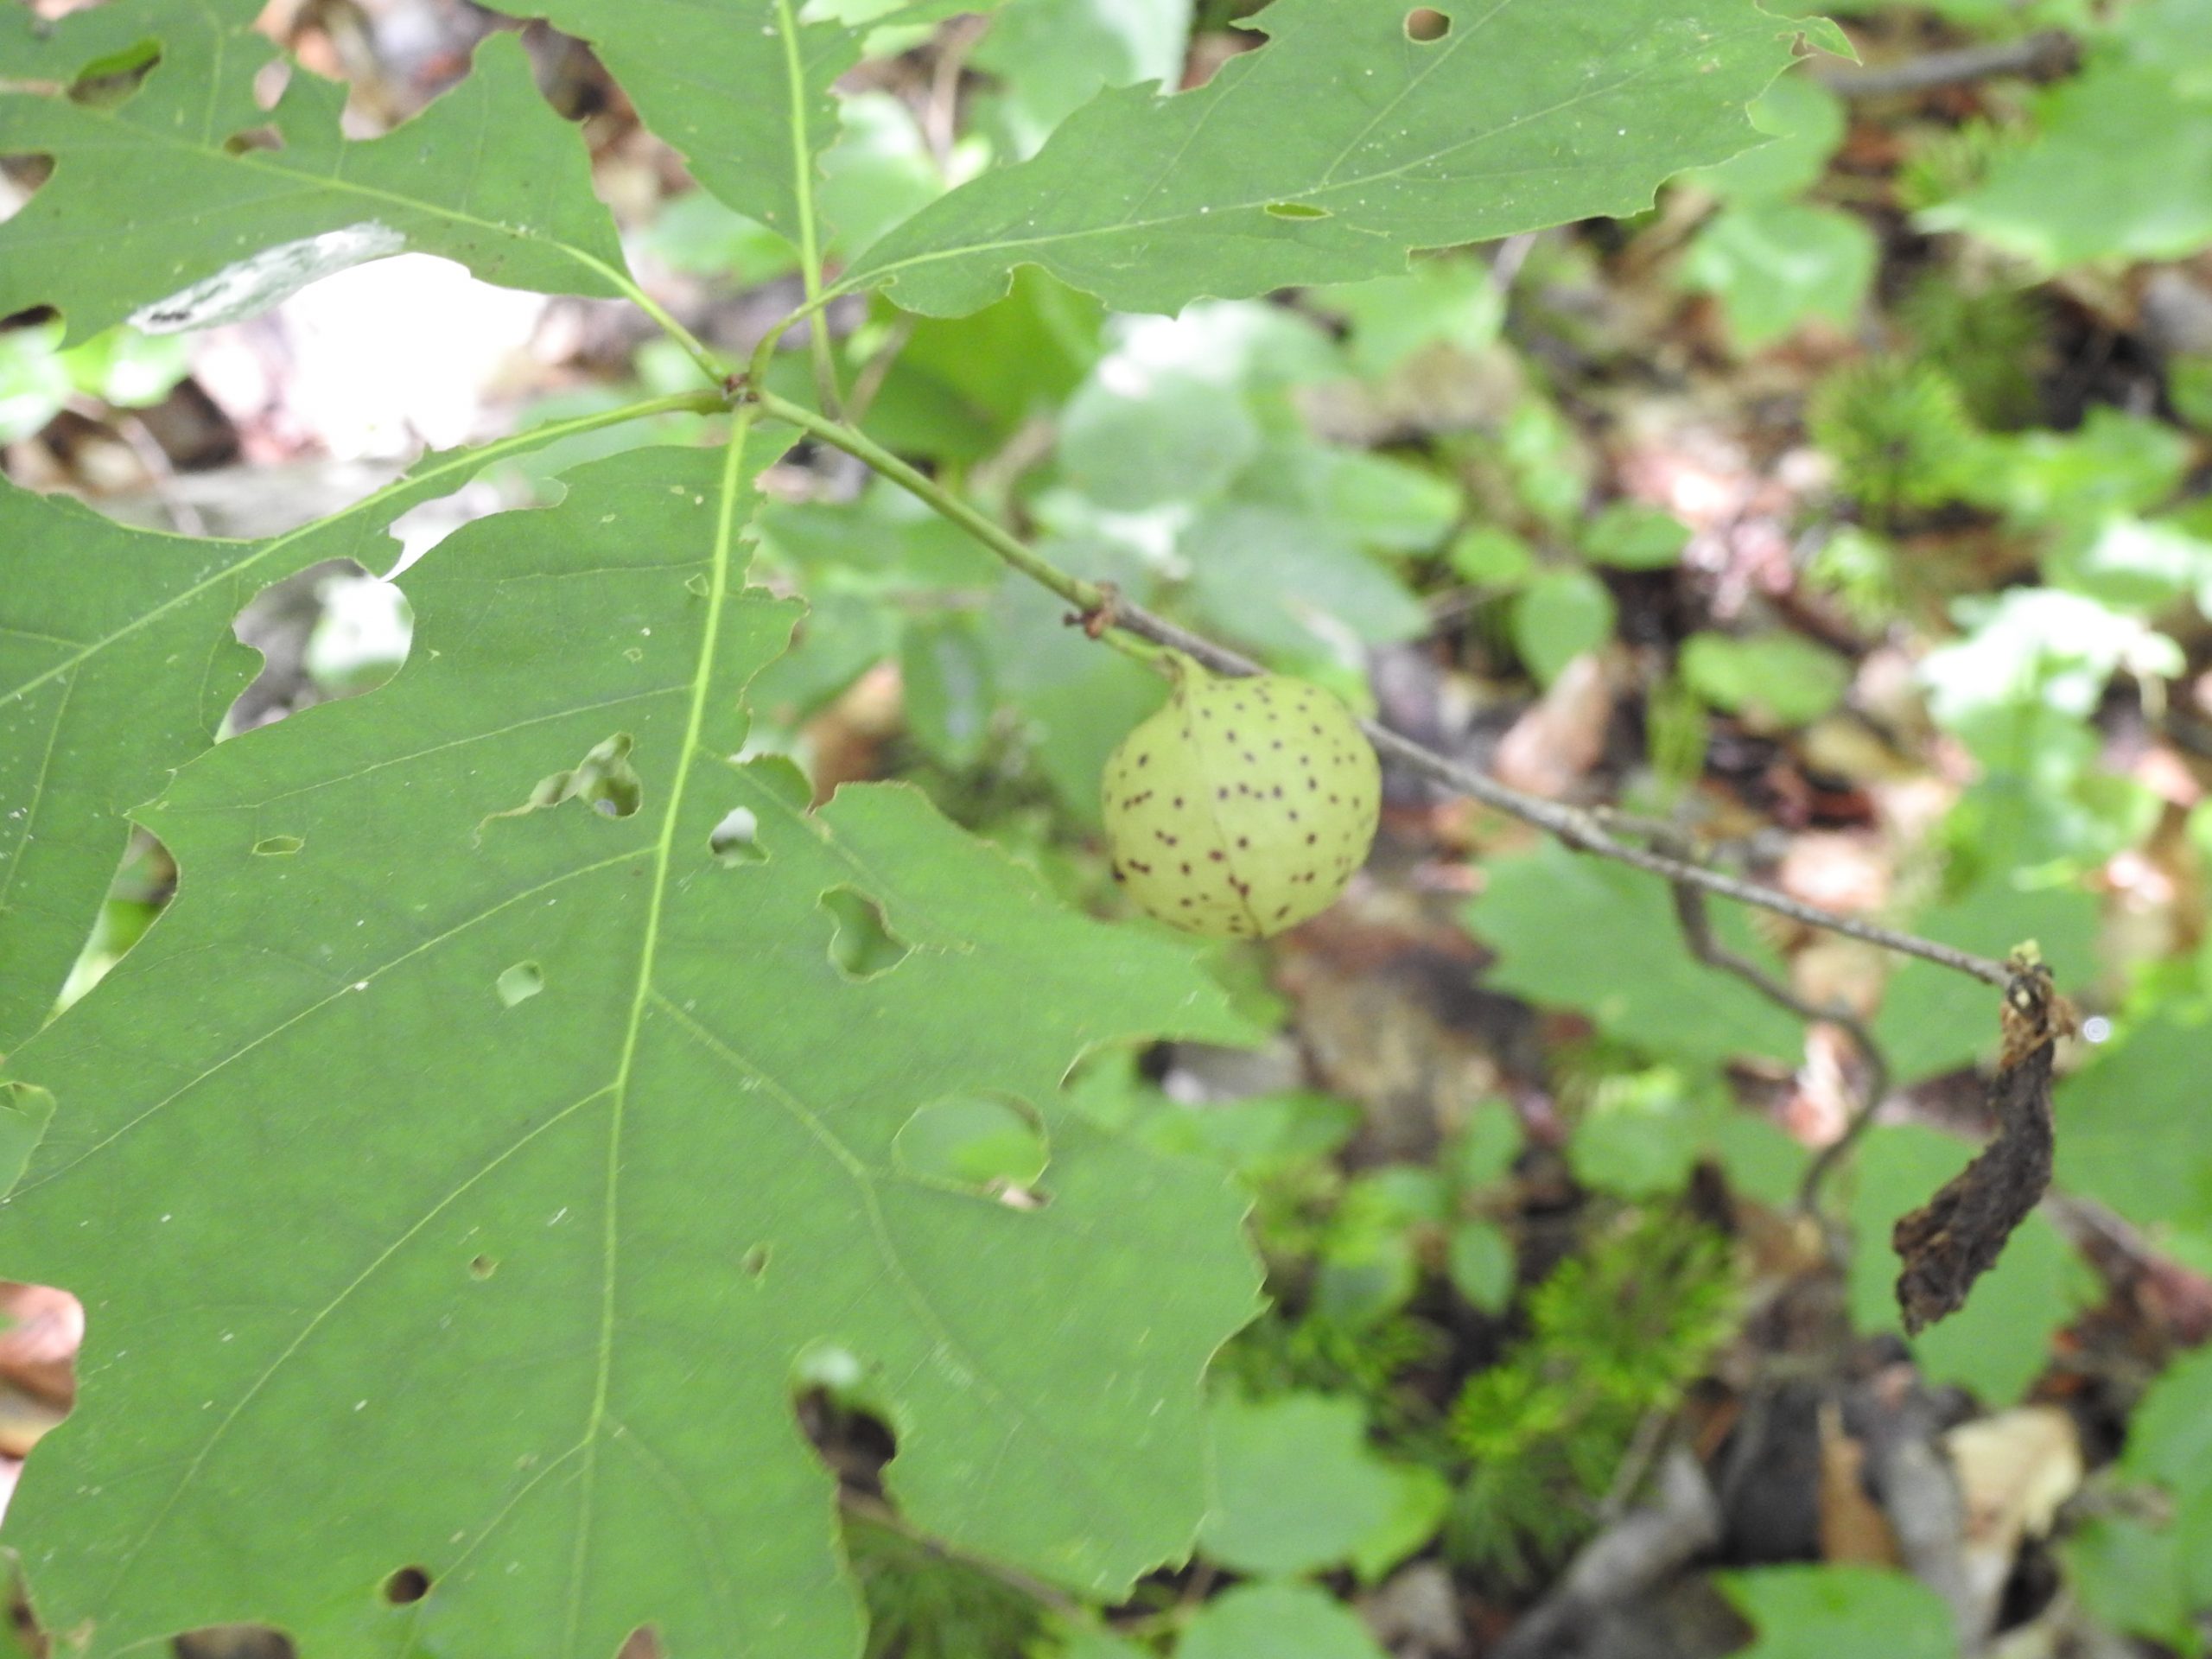 Galls: Gene Altering Injections Cause Plant Mutations